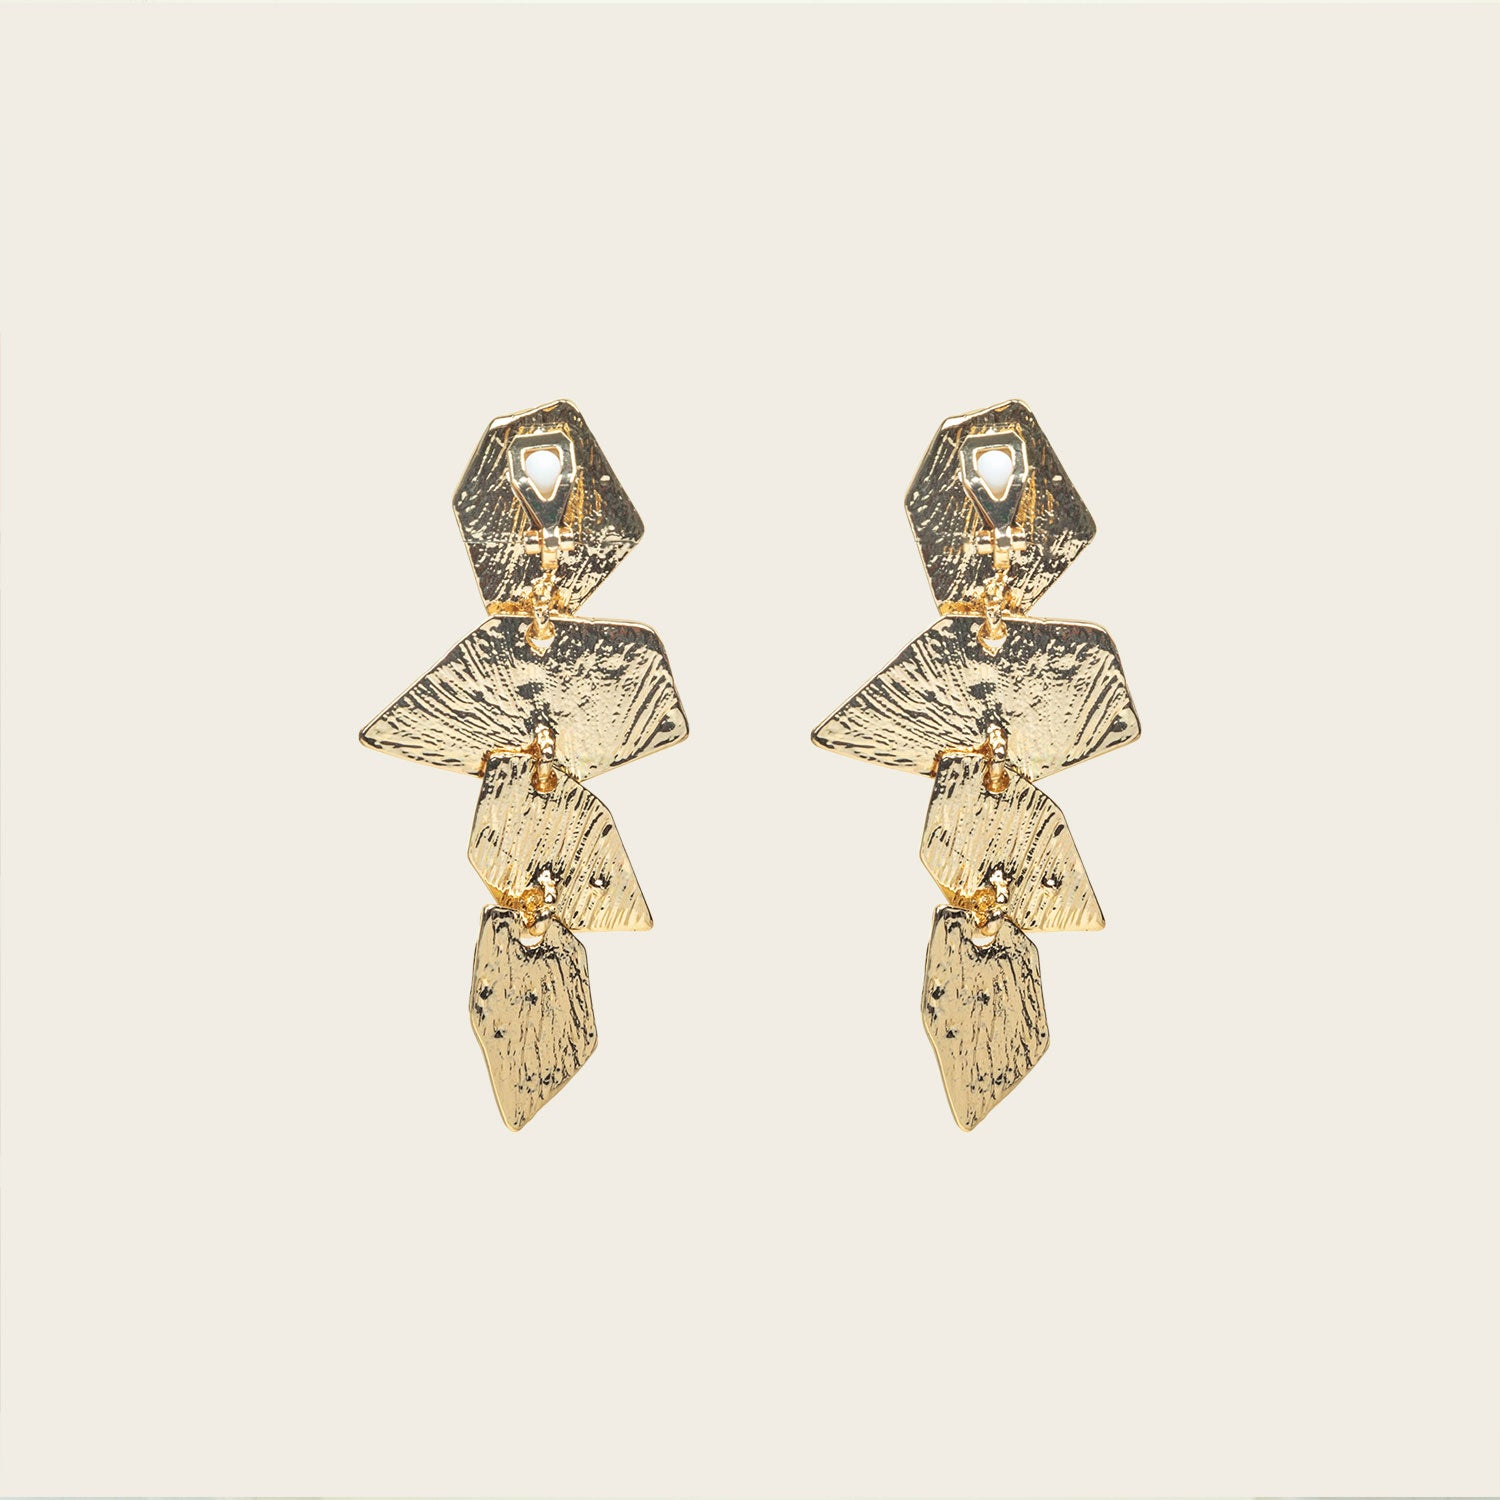 Image of the Manhattan Drop Clip On Earrings in Gold provide a secure and comfortable fit for any ear type. The padded clip-on design features a zinc and copper alloy construction, and lasts approximately 8-12 hours. As the earring pairs are non-adjustable, each purchase contains a single pair.